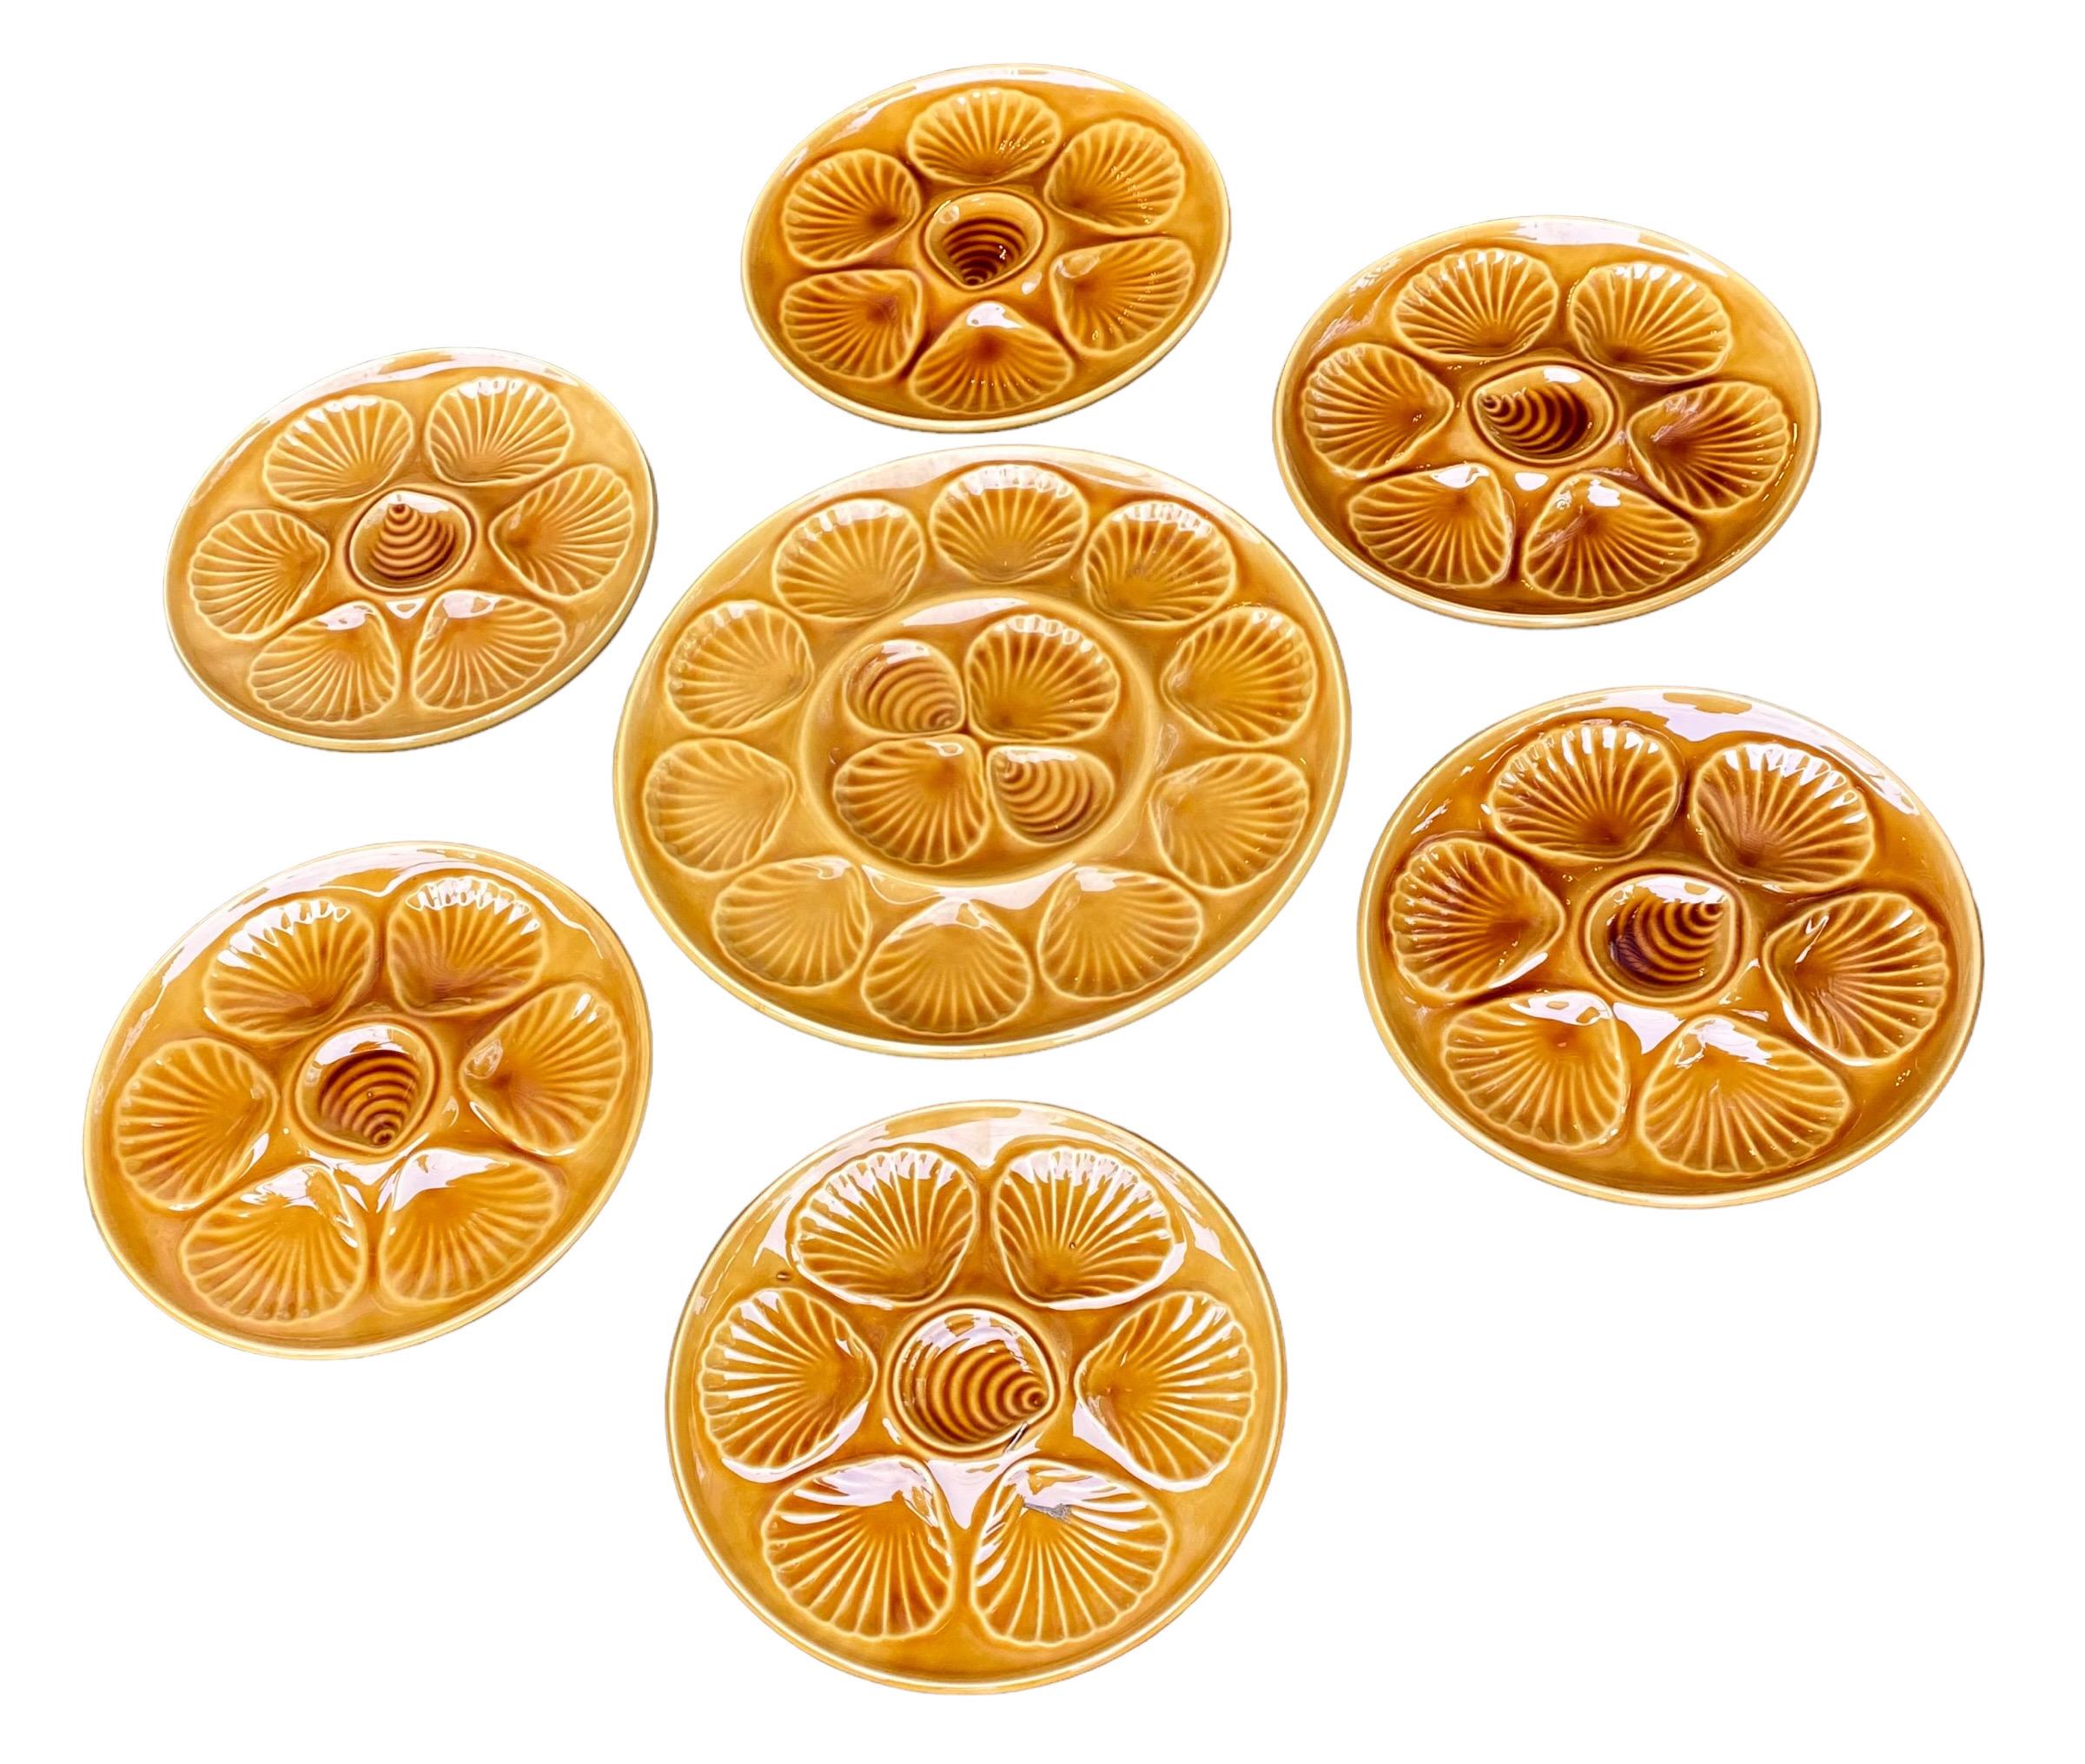 Mid-20th Century Set of Vintage French Majolica Oyster Plates and Master Platter For Sale